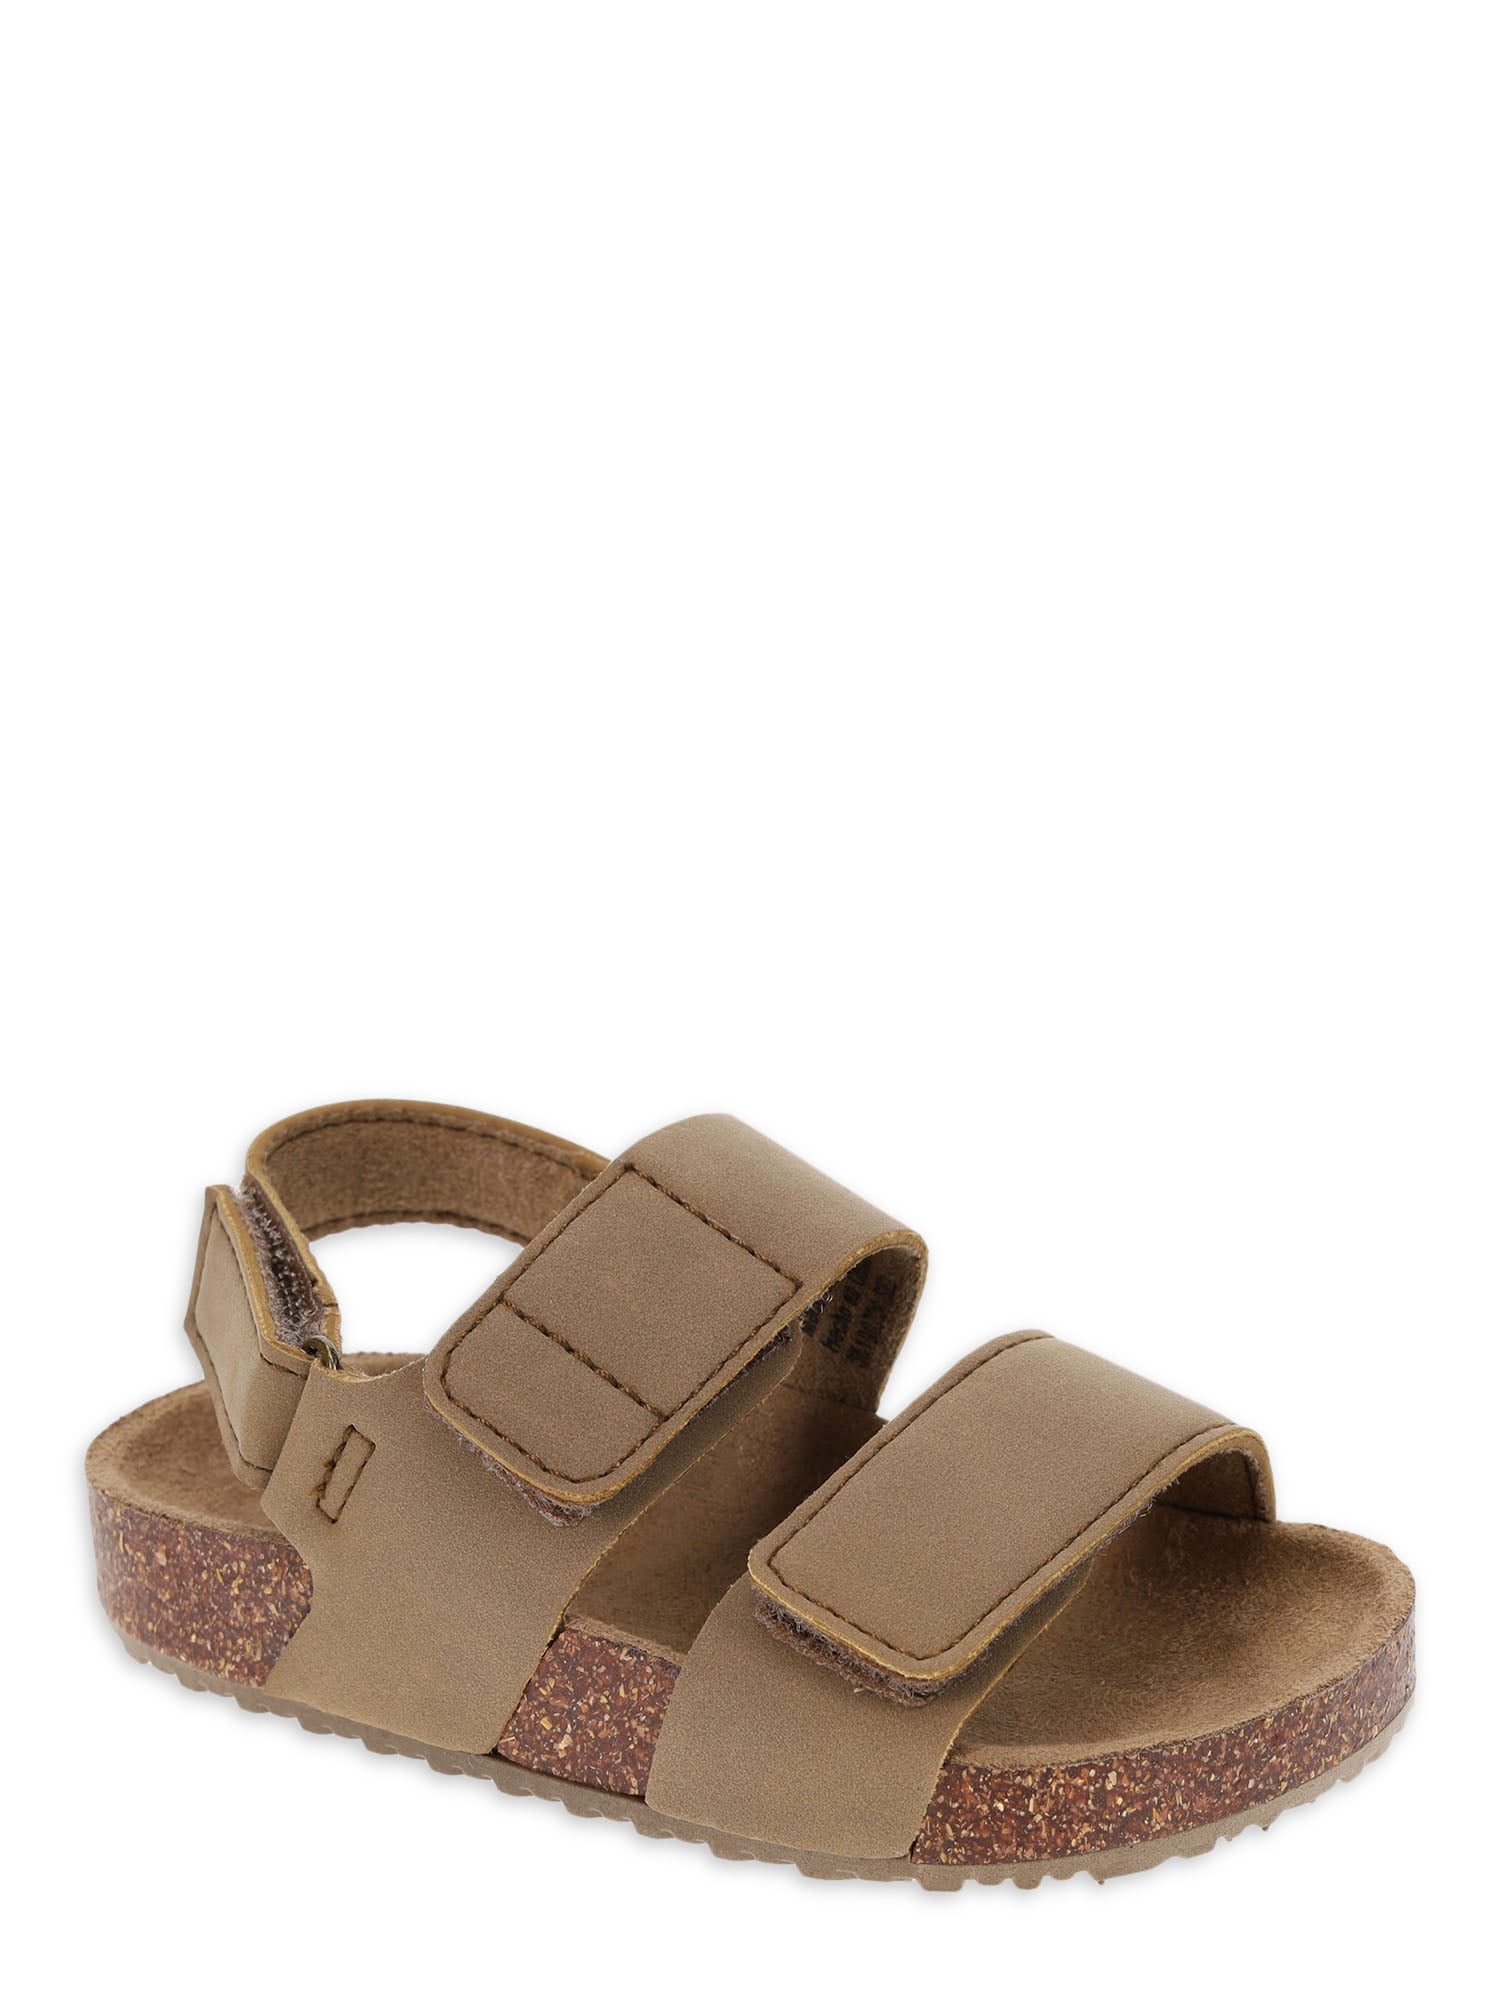 BOYS KIDS FAUX LEATHER BUCKLE HOLIDAY BEACH SUMMER BROWN BLACK SANDALS SHOE SIZE 